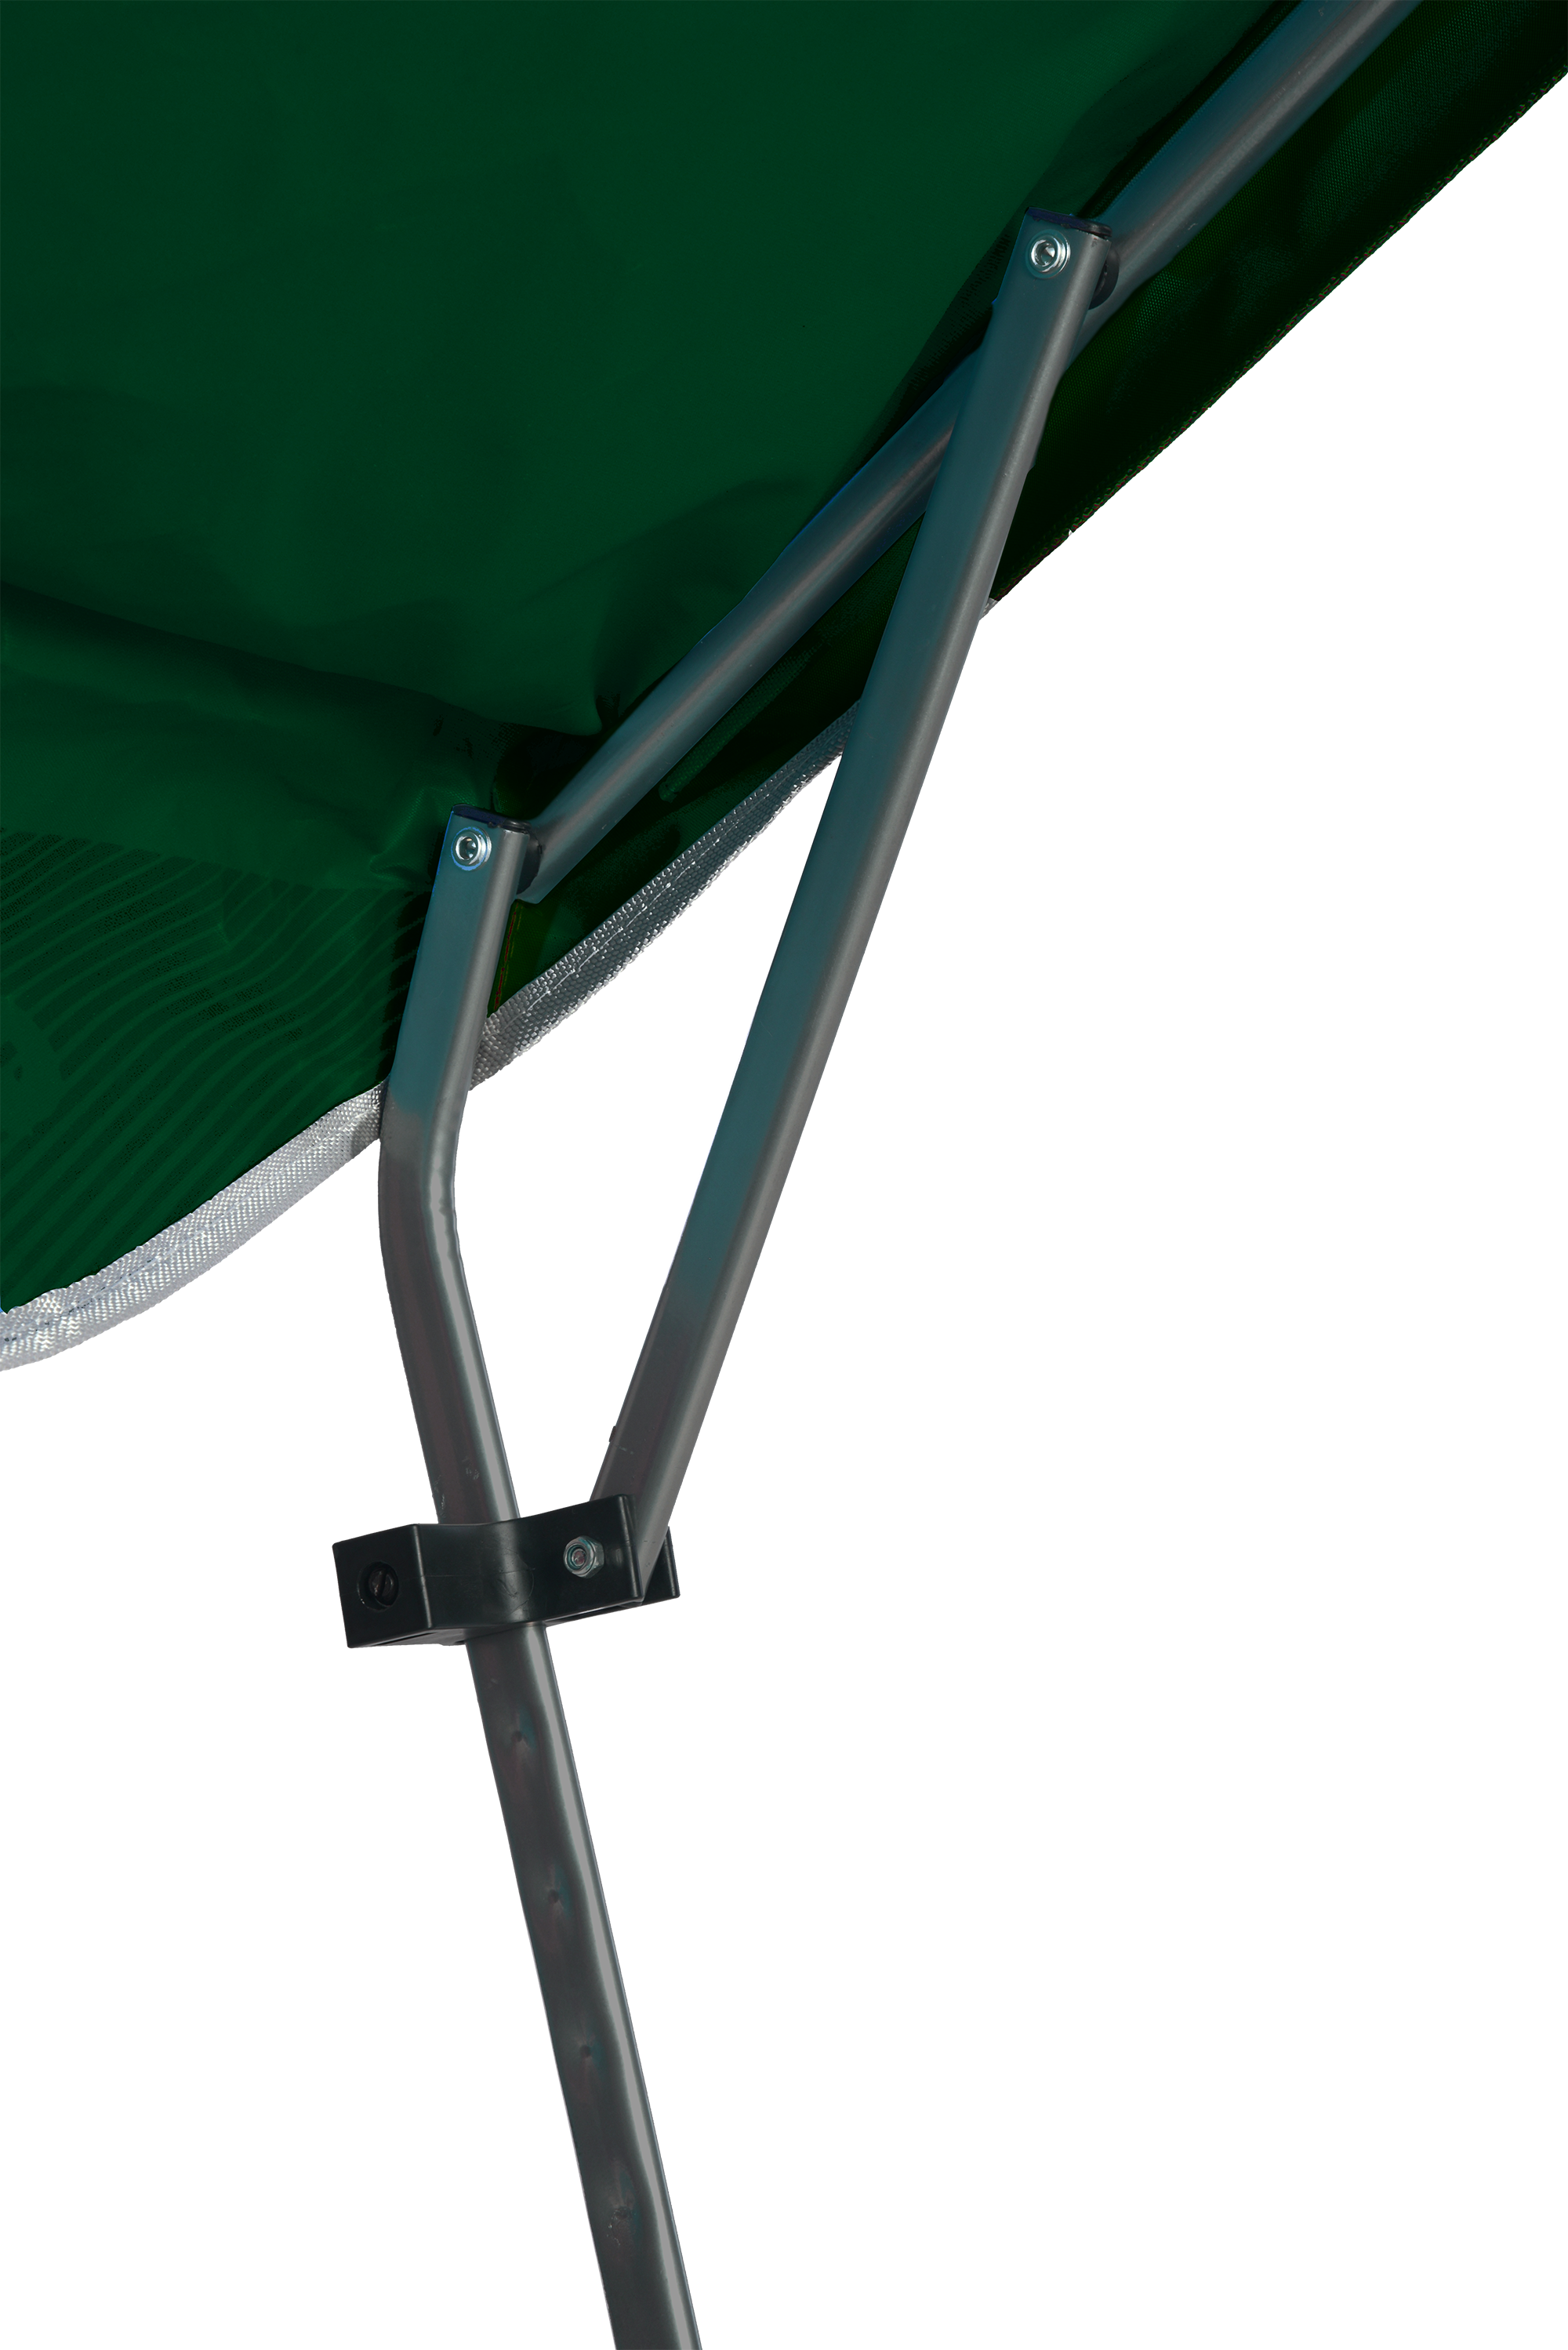 Quik Shade Full Size Folding Chair, Forest Green, Lawn Chairs - image 2 of 5